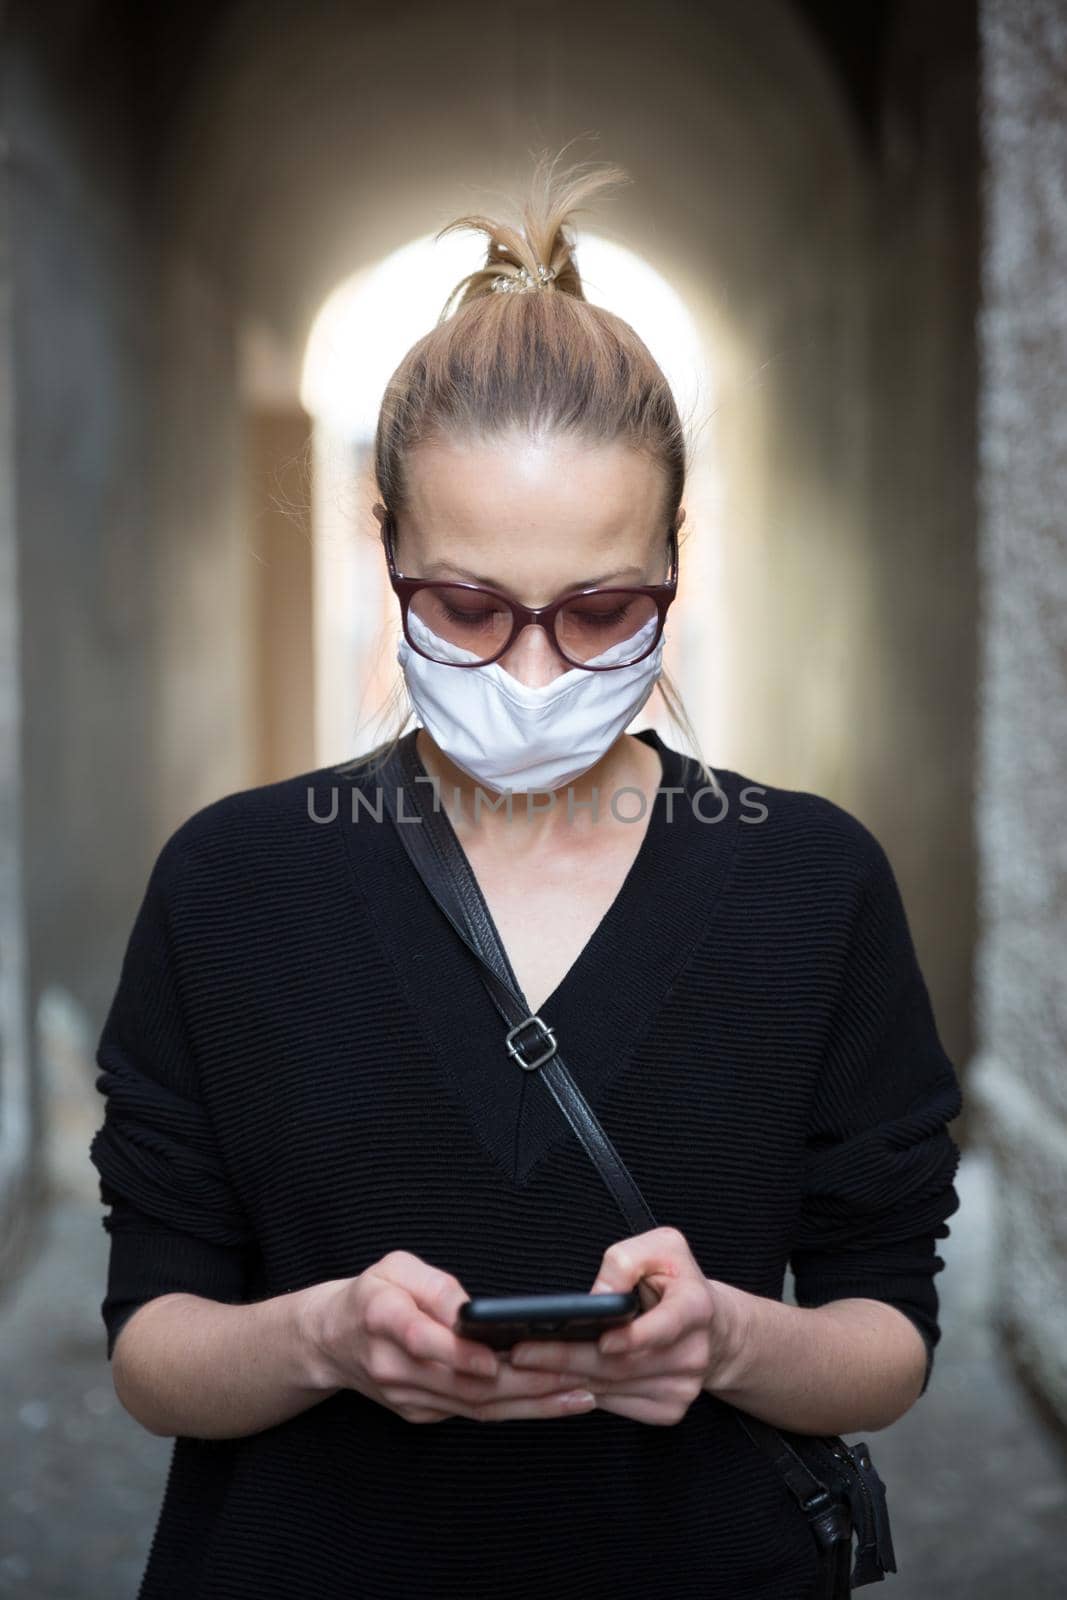 COVID-19 pandemic coronavirus. Casual caucasian woman at medieval city street using mobile phone, wearing protective face mask against spreading of coronavirus and disease transmission.